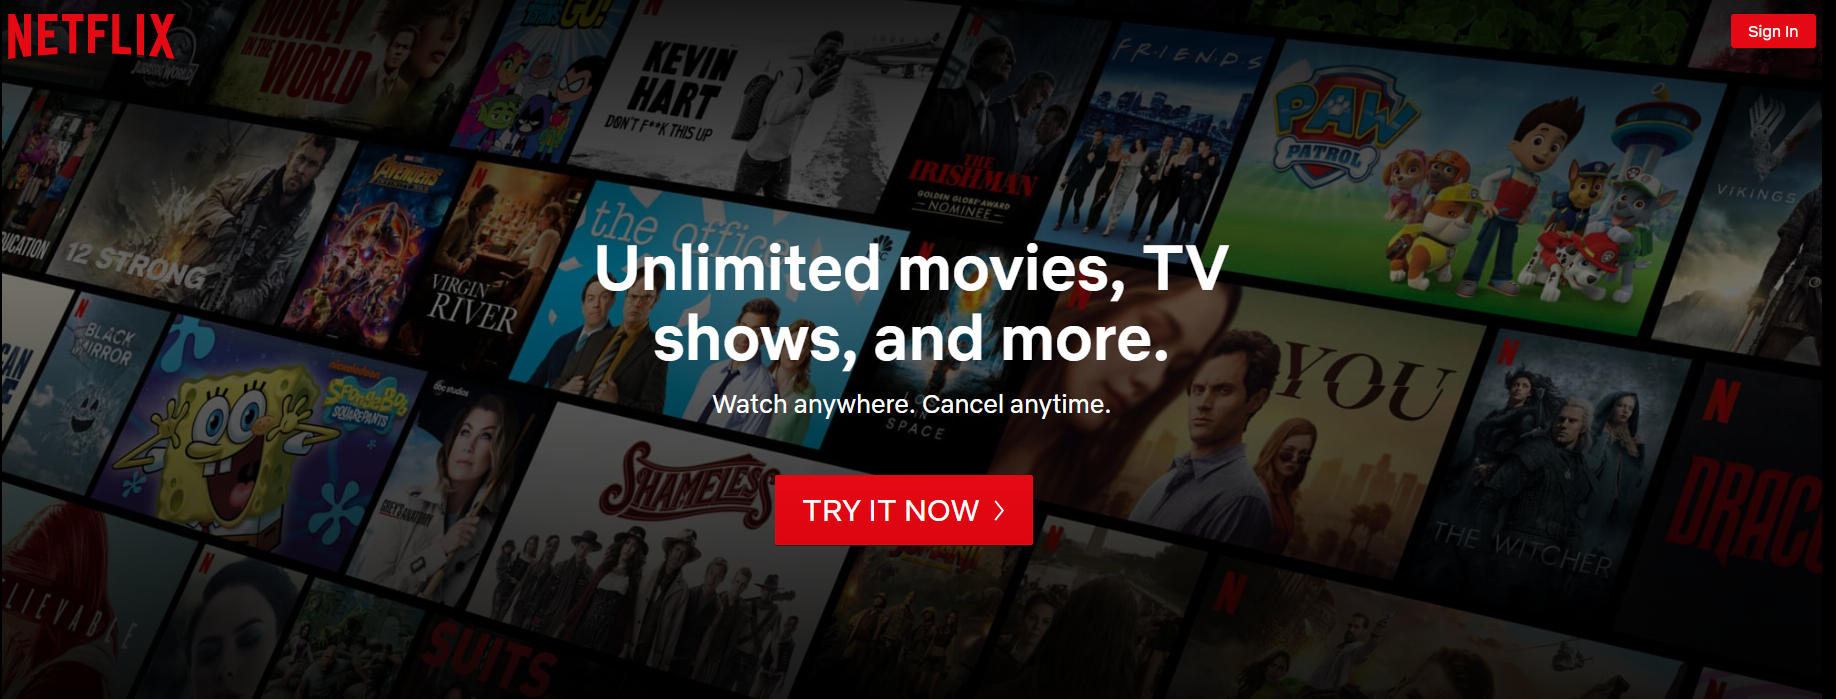 Netflix call-to-action example 2020